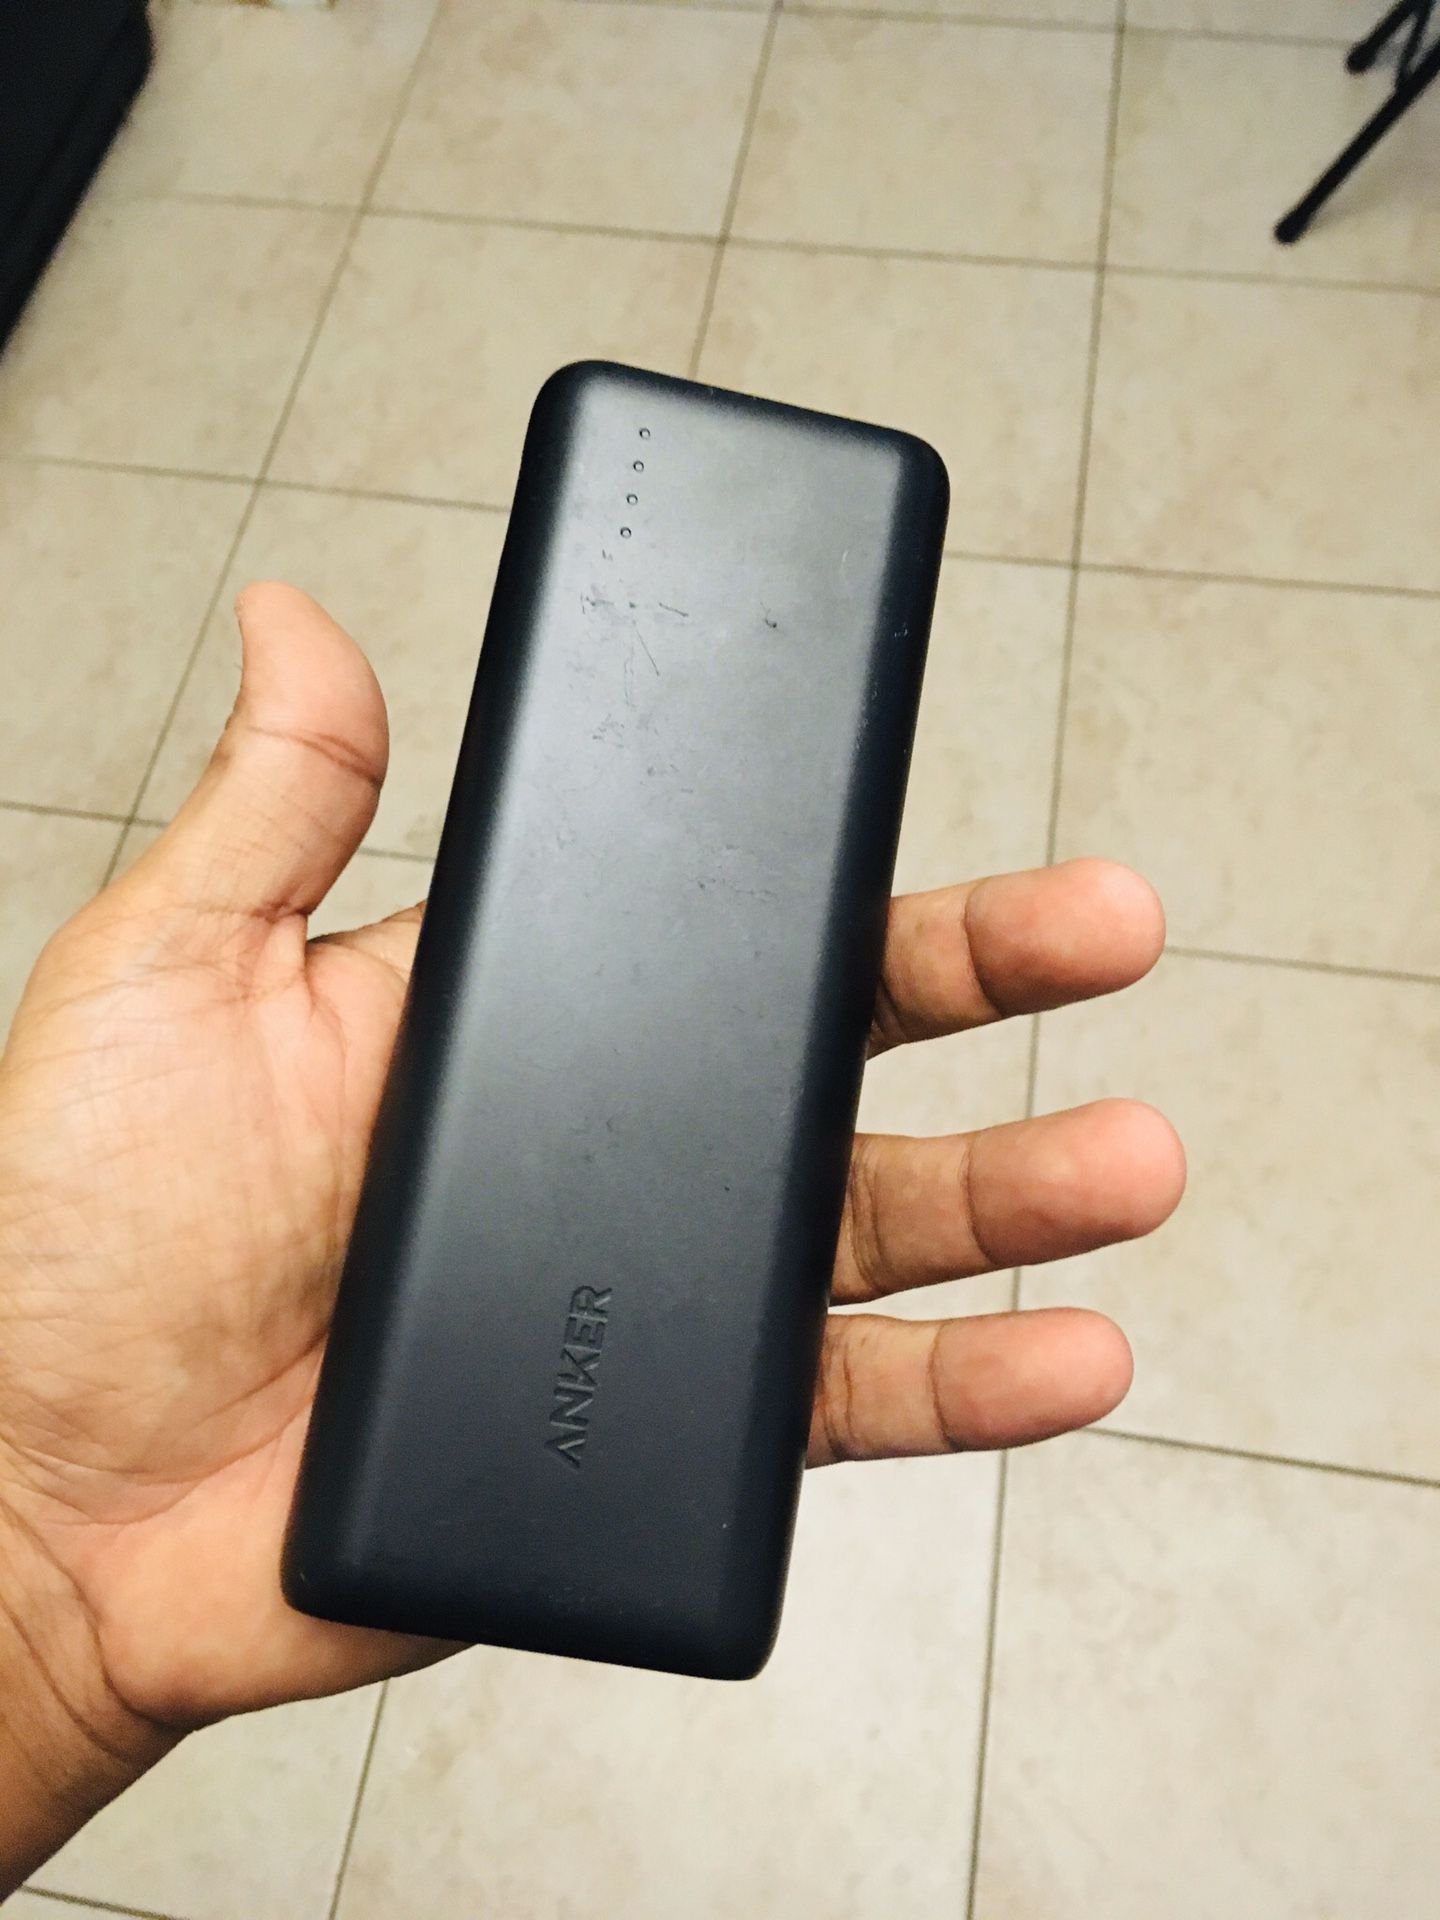 Anker PowerCore 20100 Portable Charger for Sale in Houston, TX OfferUp